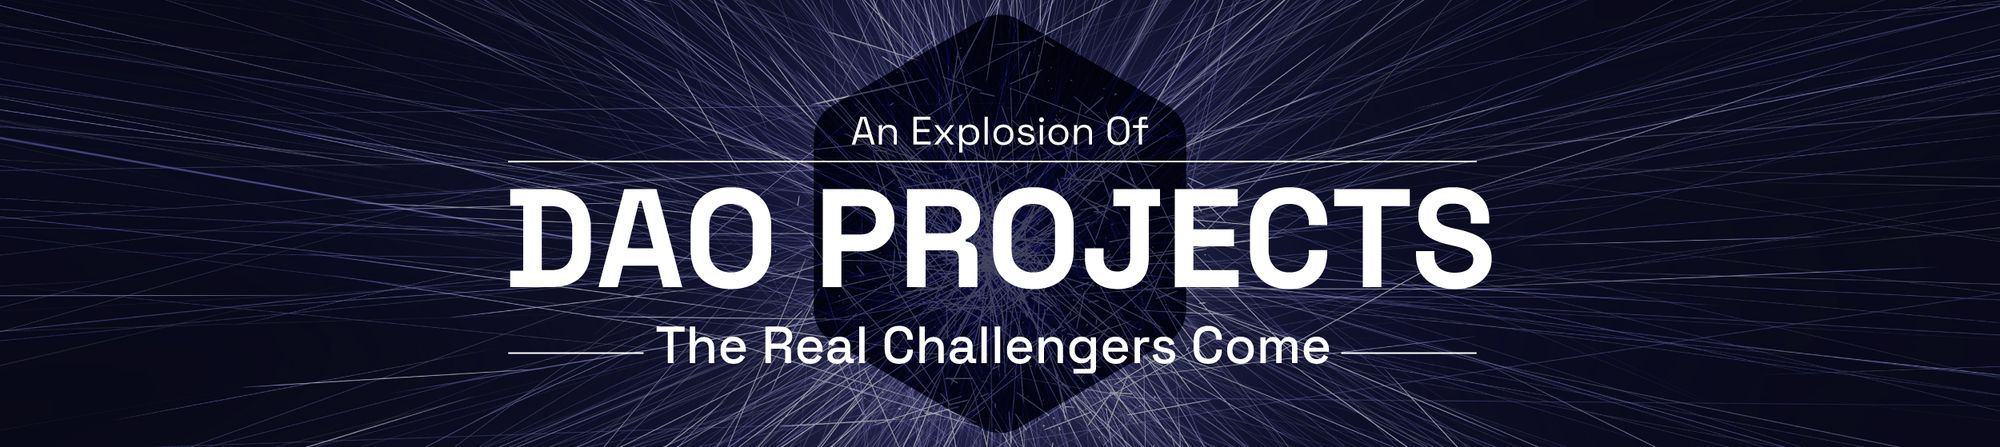 An Explosion of DAO Projects: The Real Challengers Come